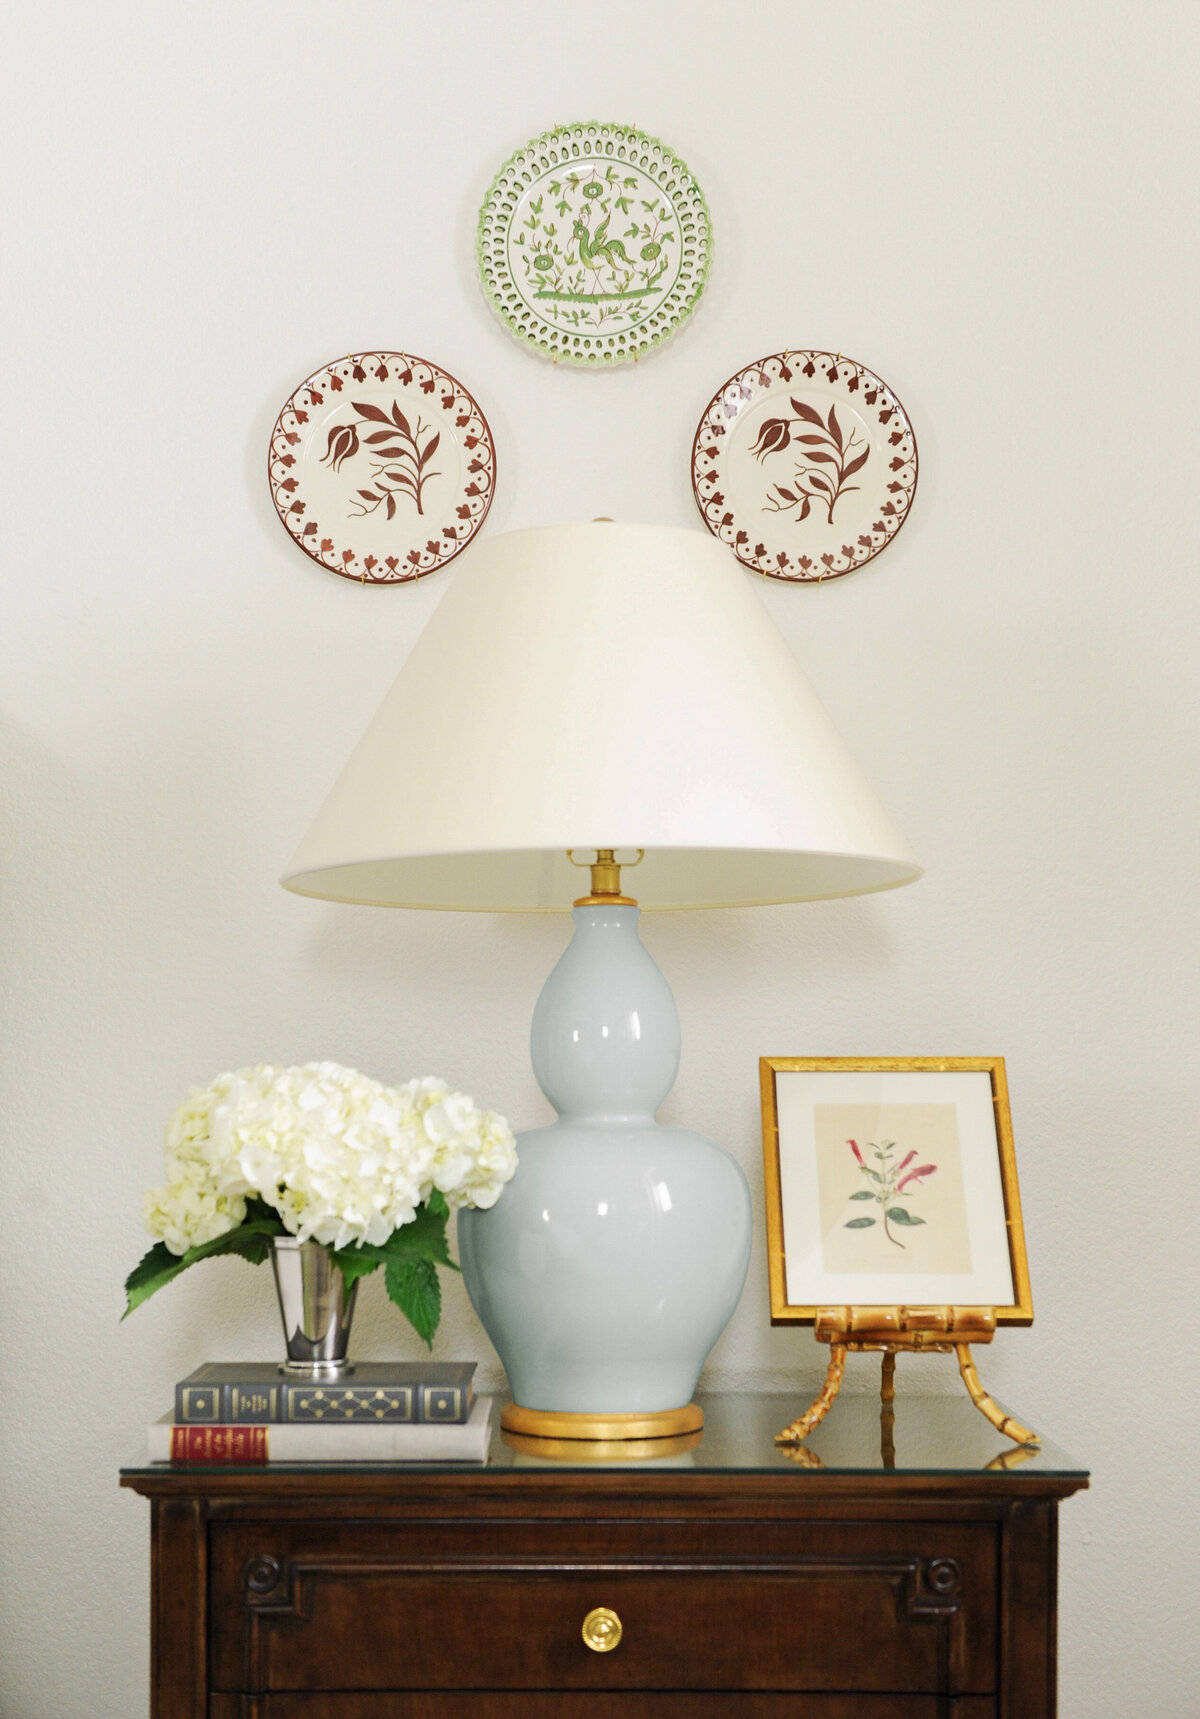 Blue visual comfort nightstand lamp on wooden nightstand with white hydrangea floral arrangement and bamboo art stand. Decorative plates are used  as artwork and wall decor.